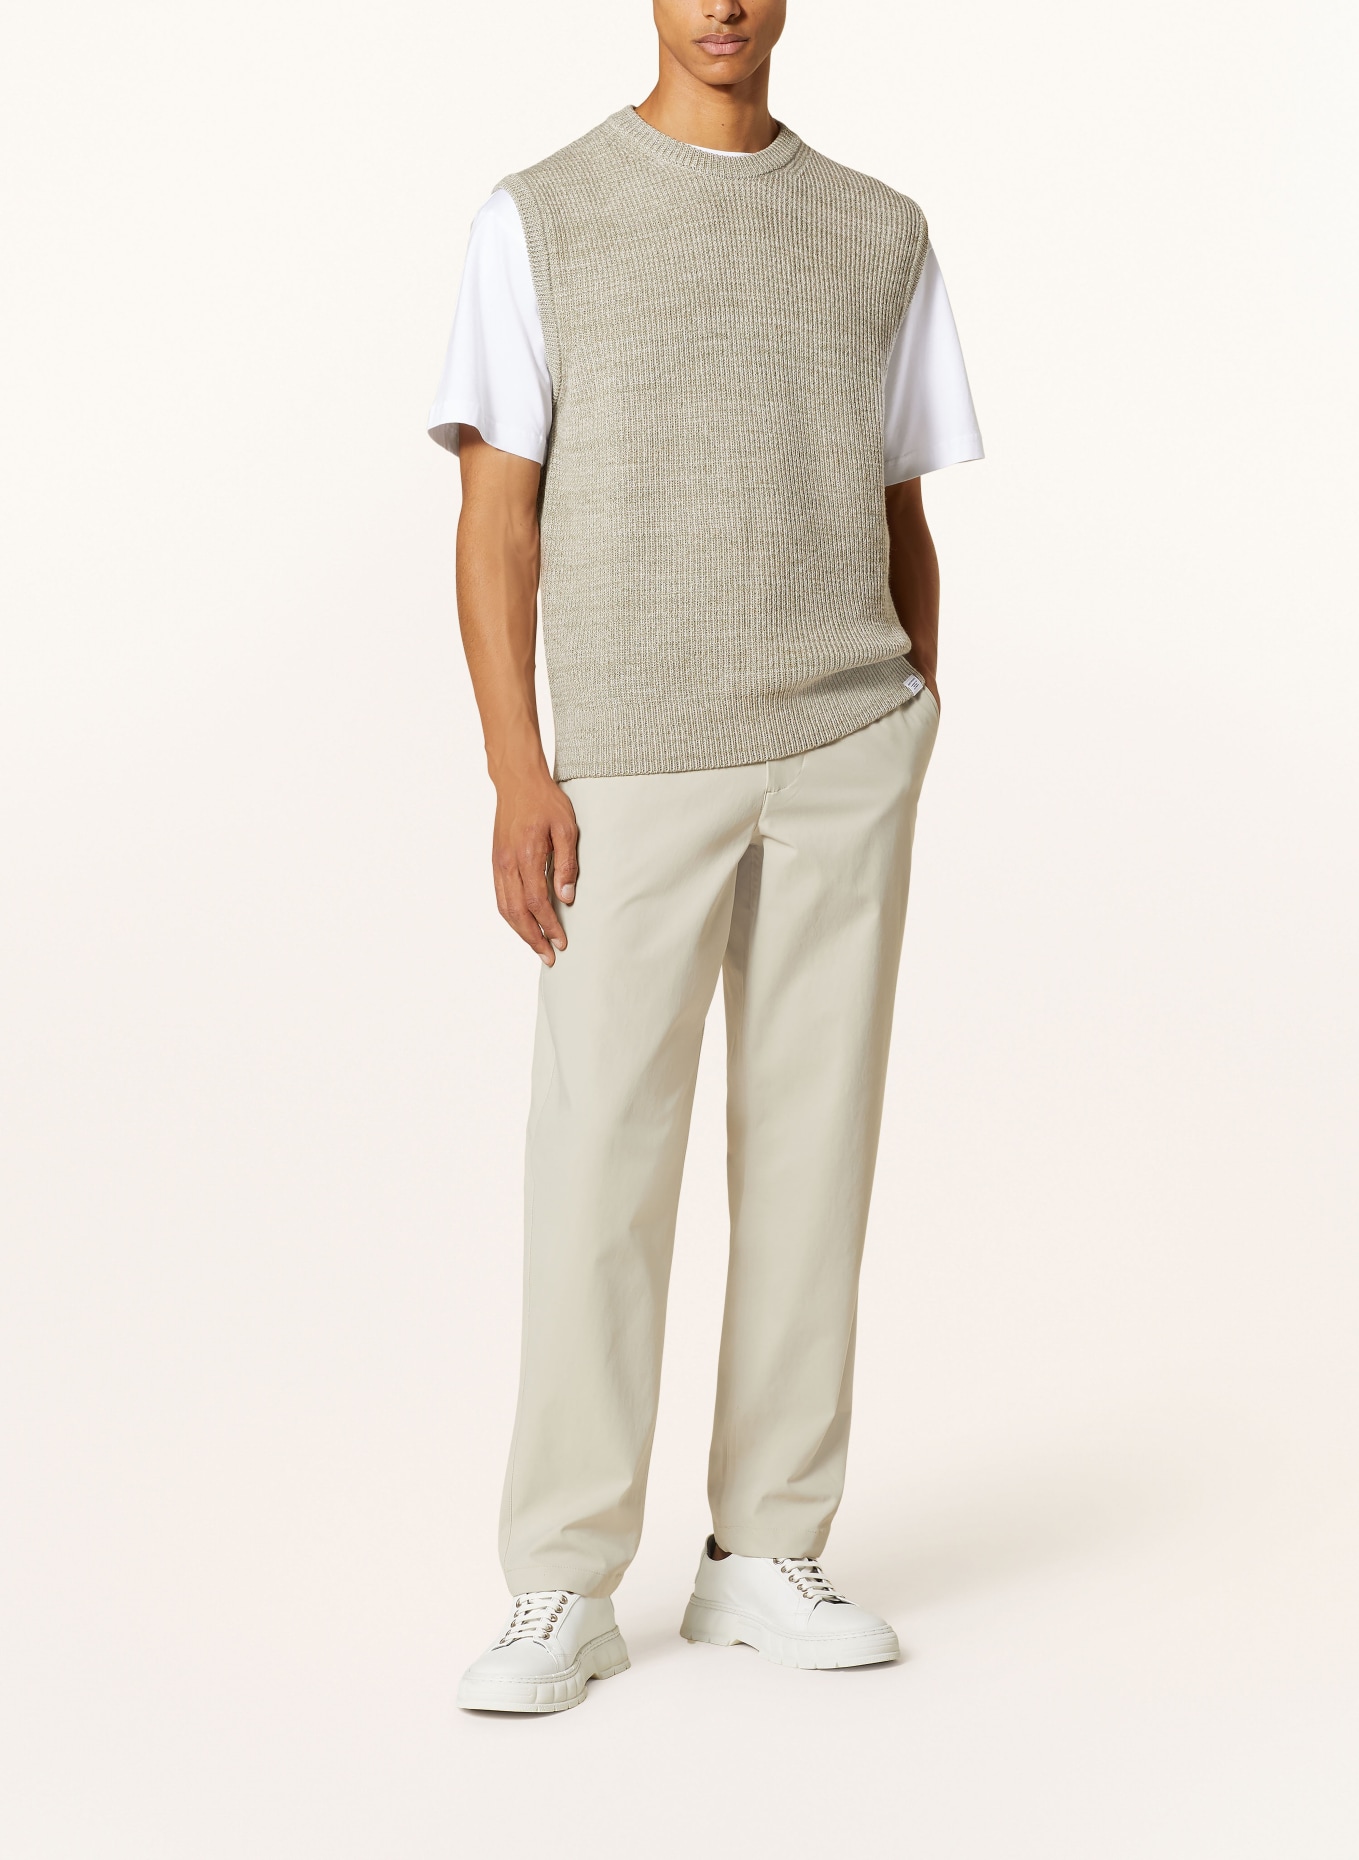 NORSE PROJECTS Sweater vest, Color: LIGHT GREEN/ CREAM (Image 2)